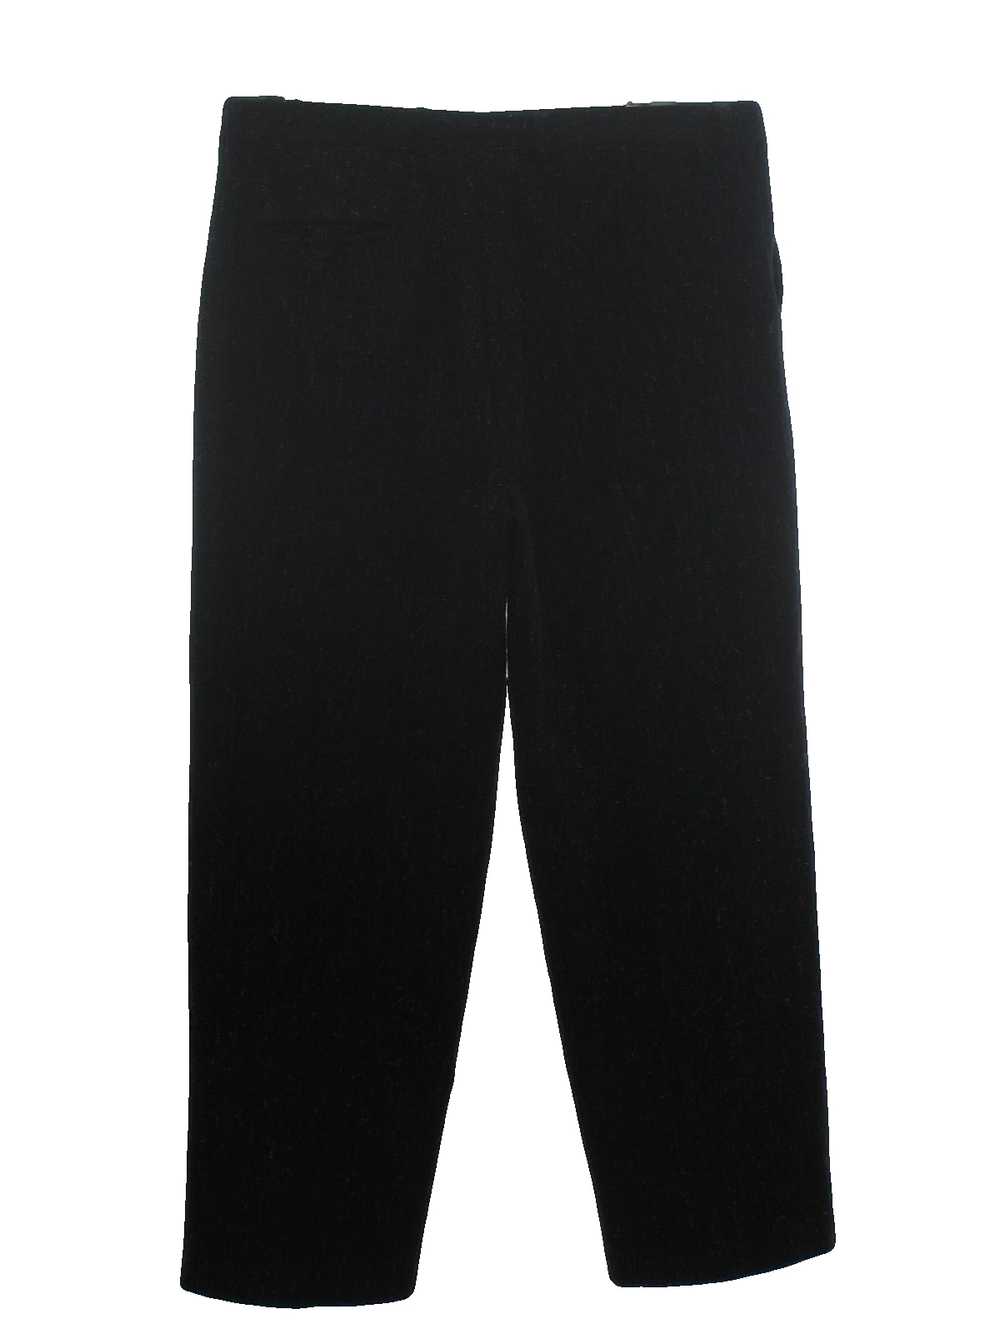 1980's RPM Mens Totally 80s Pleated Pants - image 3